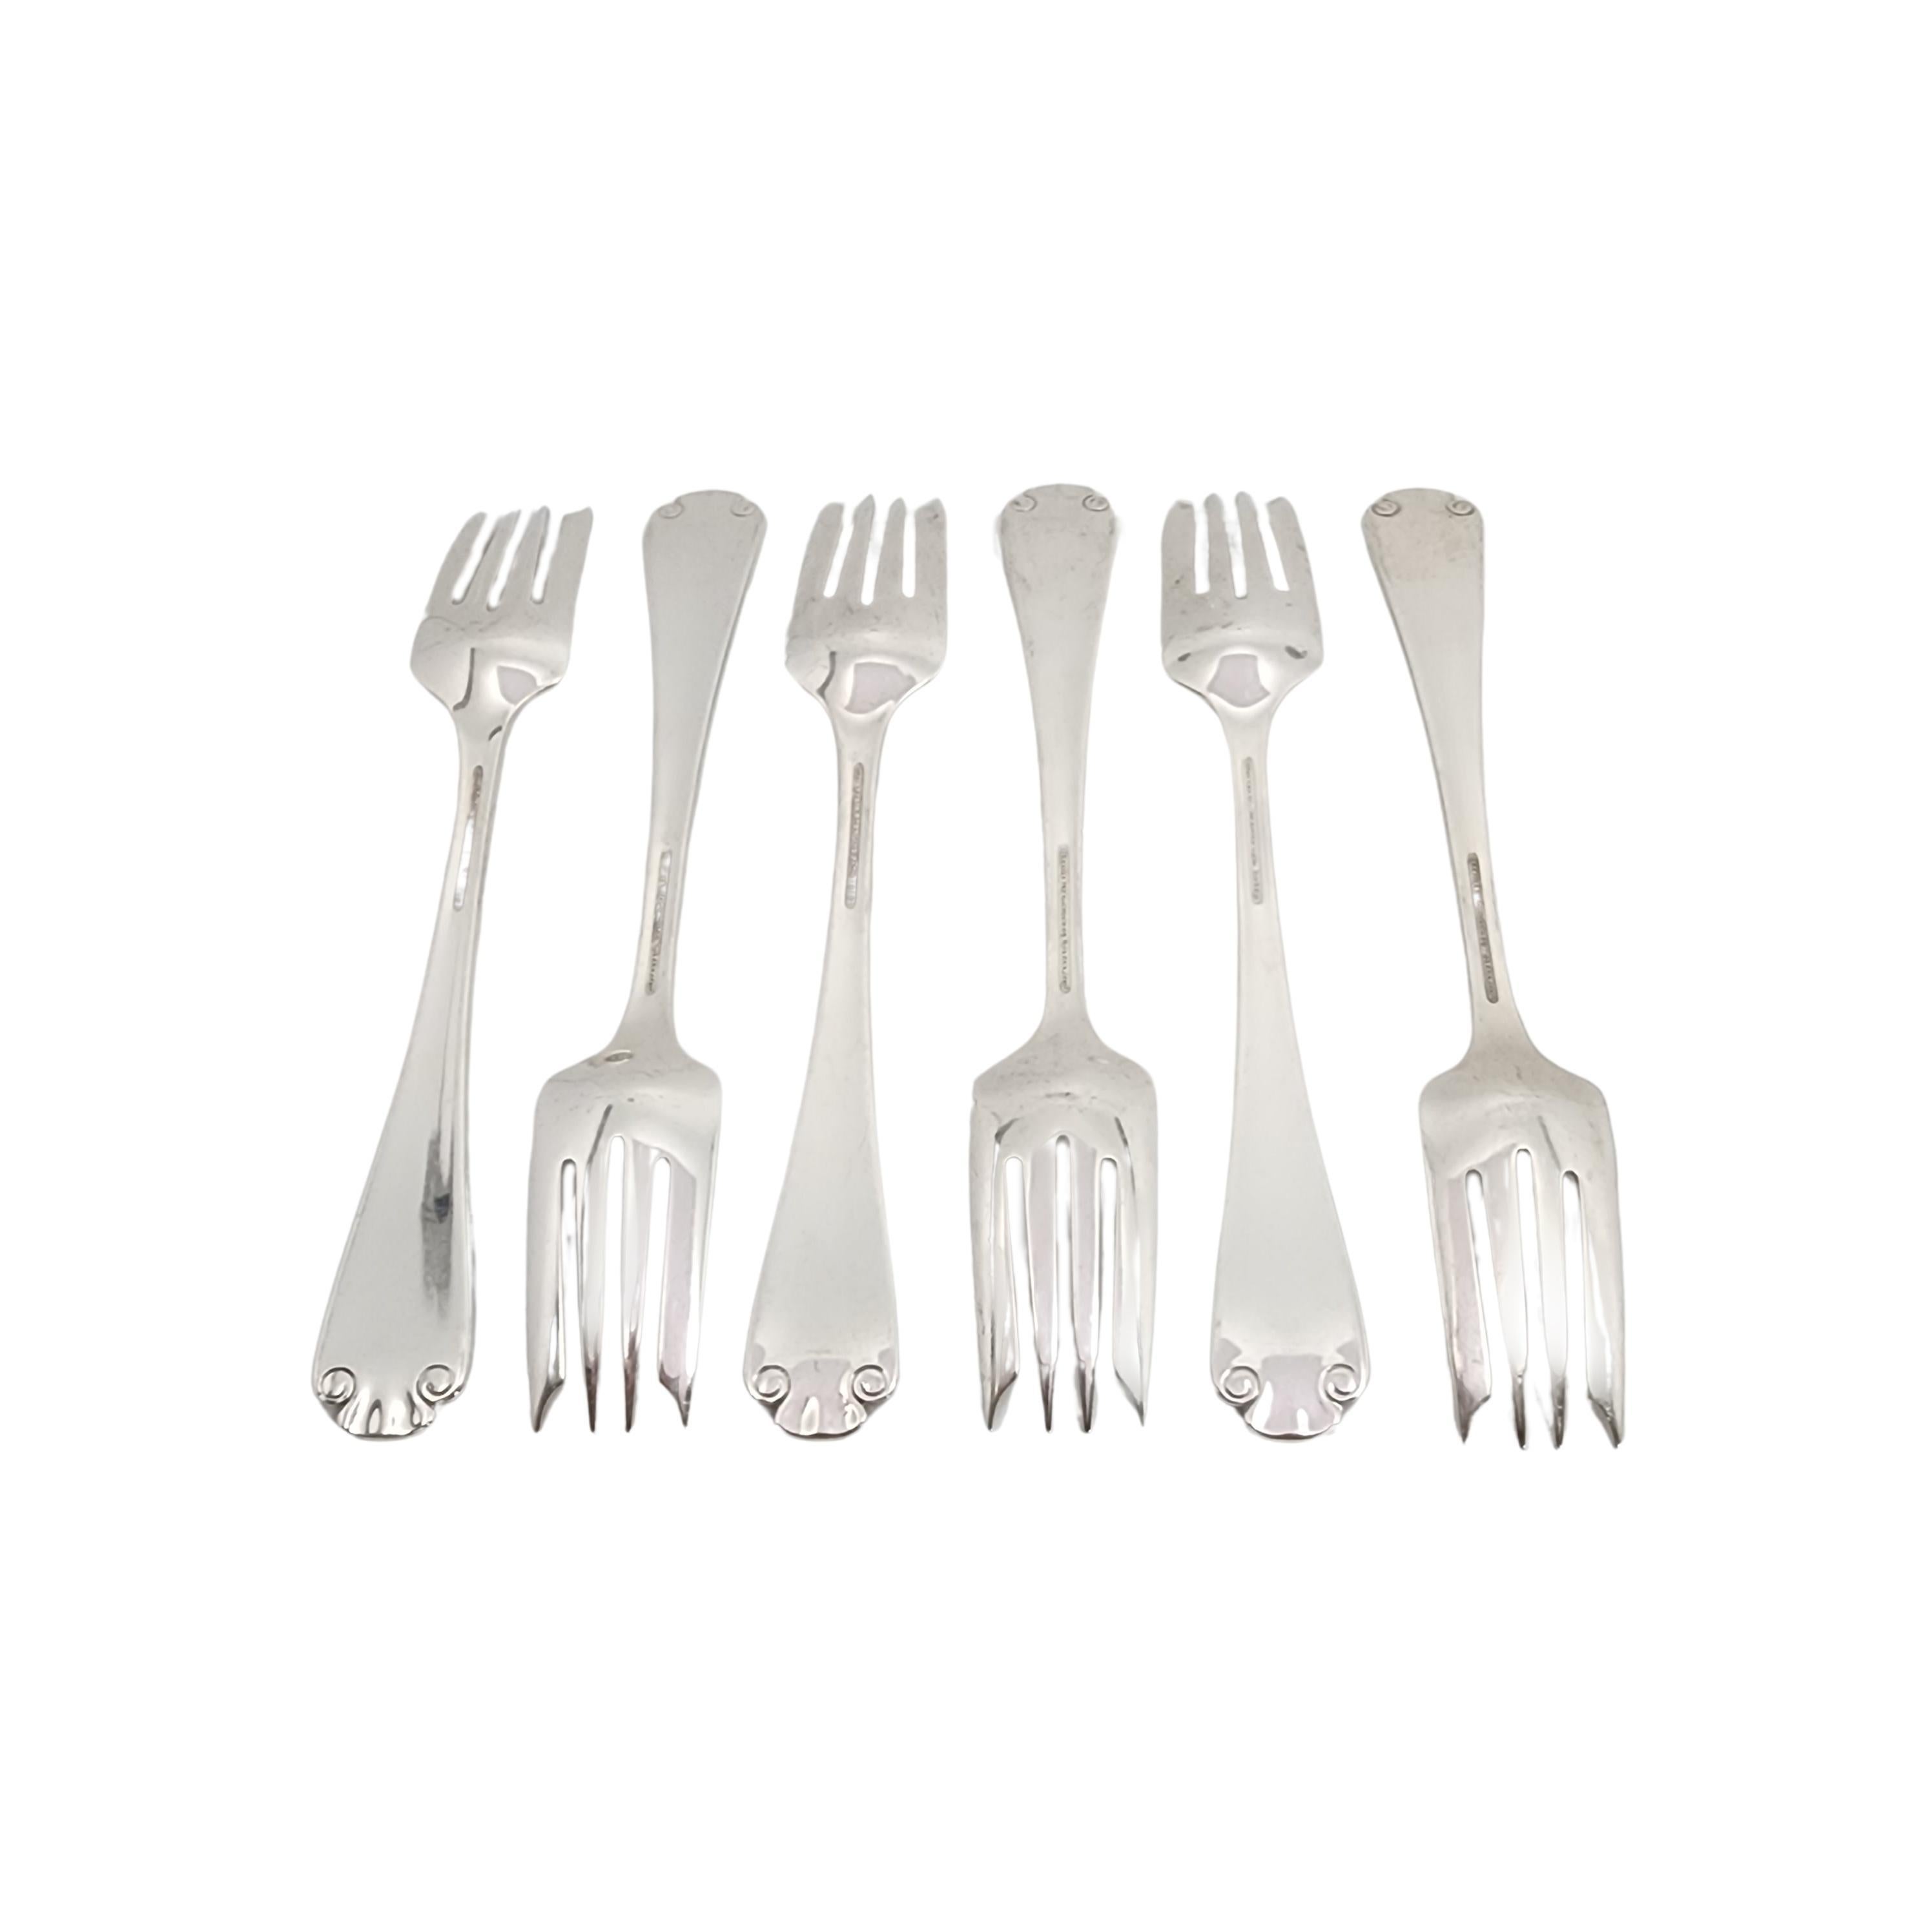 Set of 6 sterling silver salad forks by Tiffany & Co in the Flemish pattern.

No monogram.

The Flemish pattern features a simple and elegant scroll design, making it a timeless classic that is still in demand today. Hallmarks date these pieces to